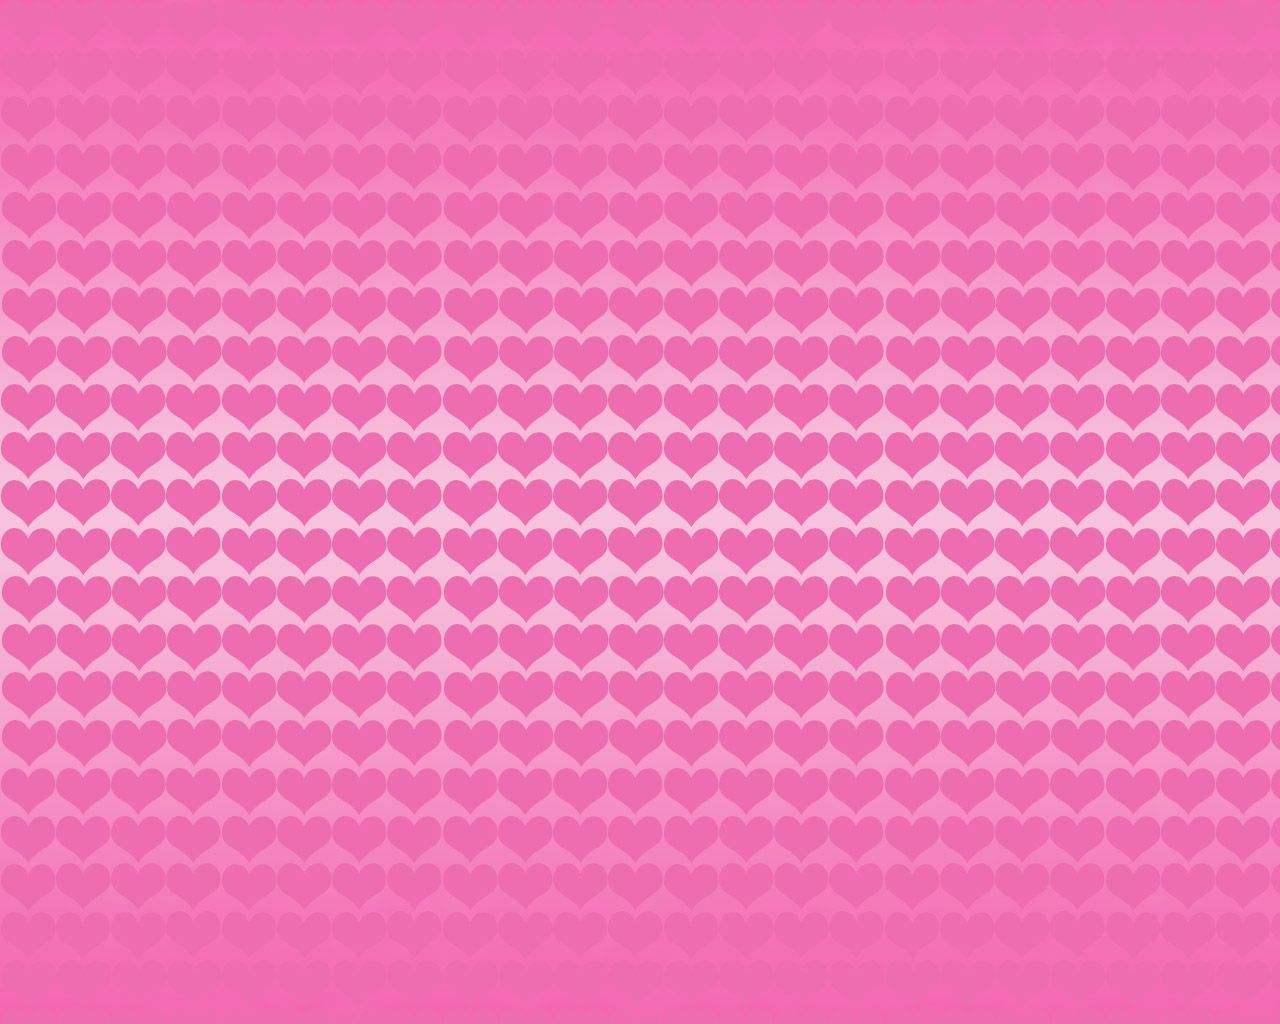 Pink Wallpaper Hd - All Wallpapers New